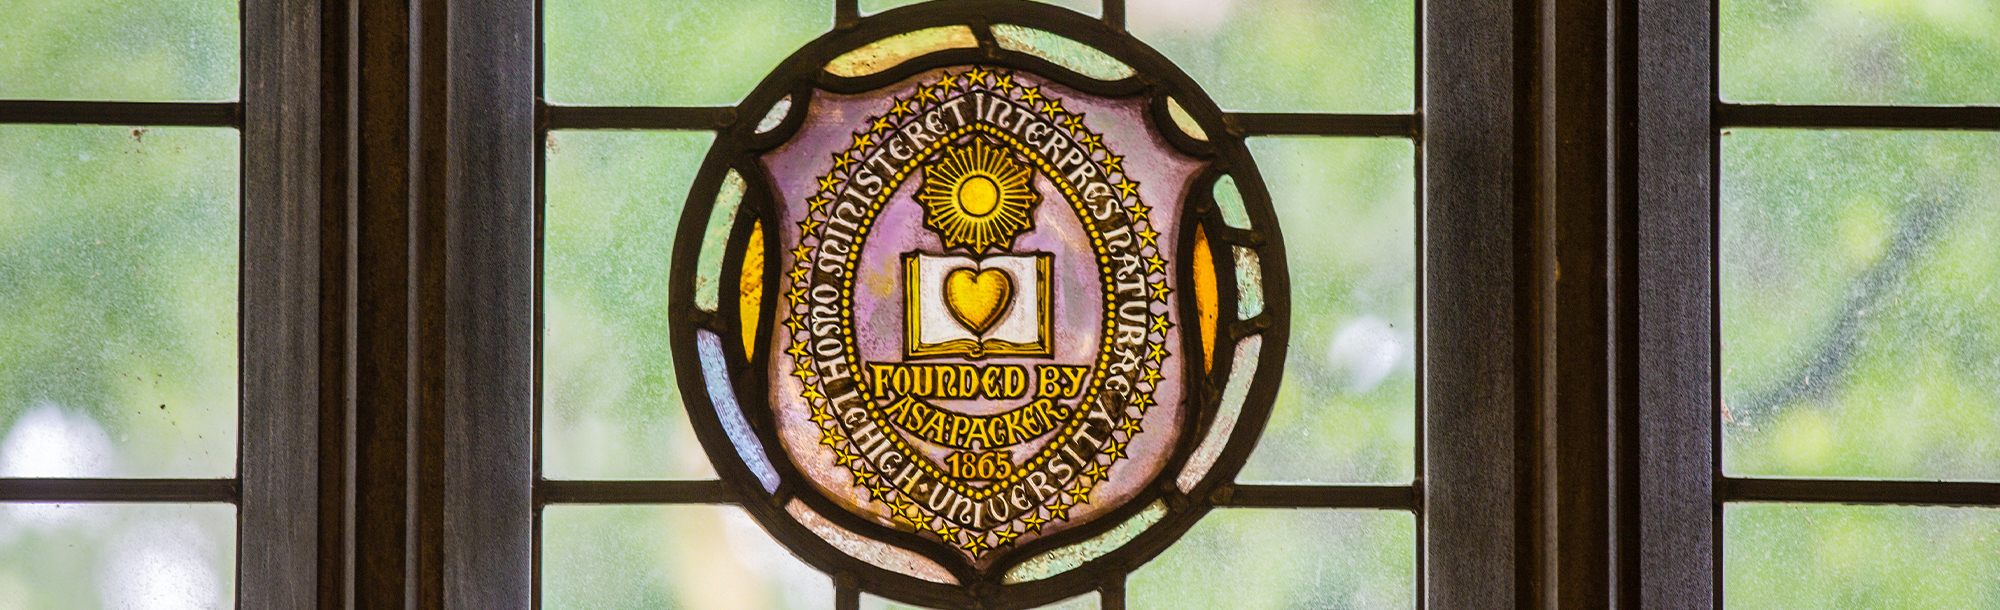 Close up of stained glass window containing the Lehigh shield and motto